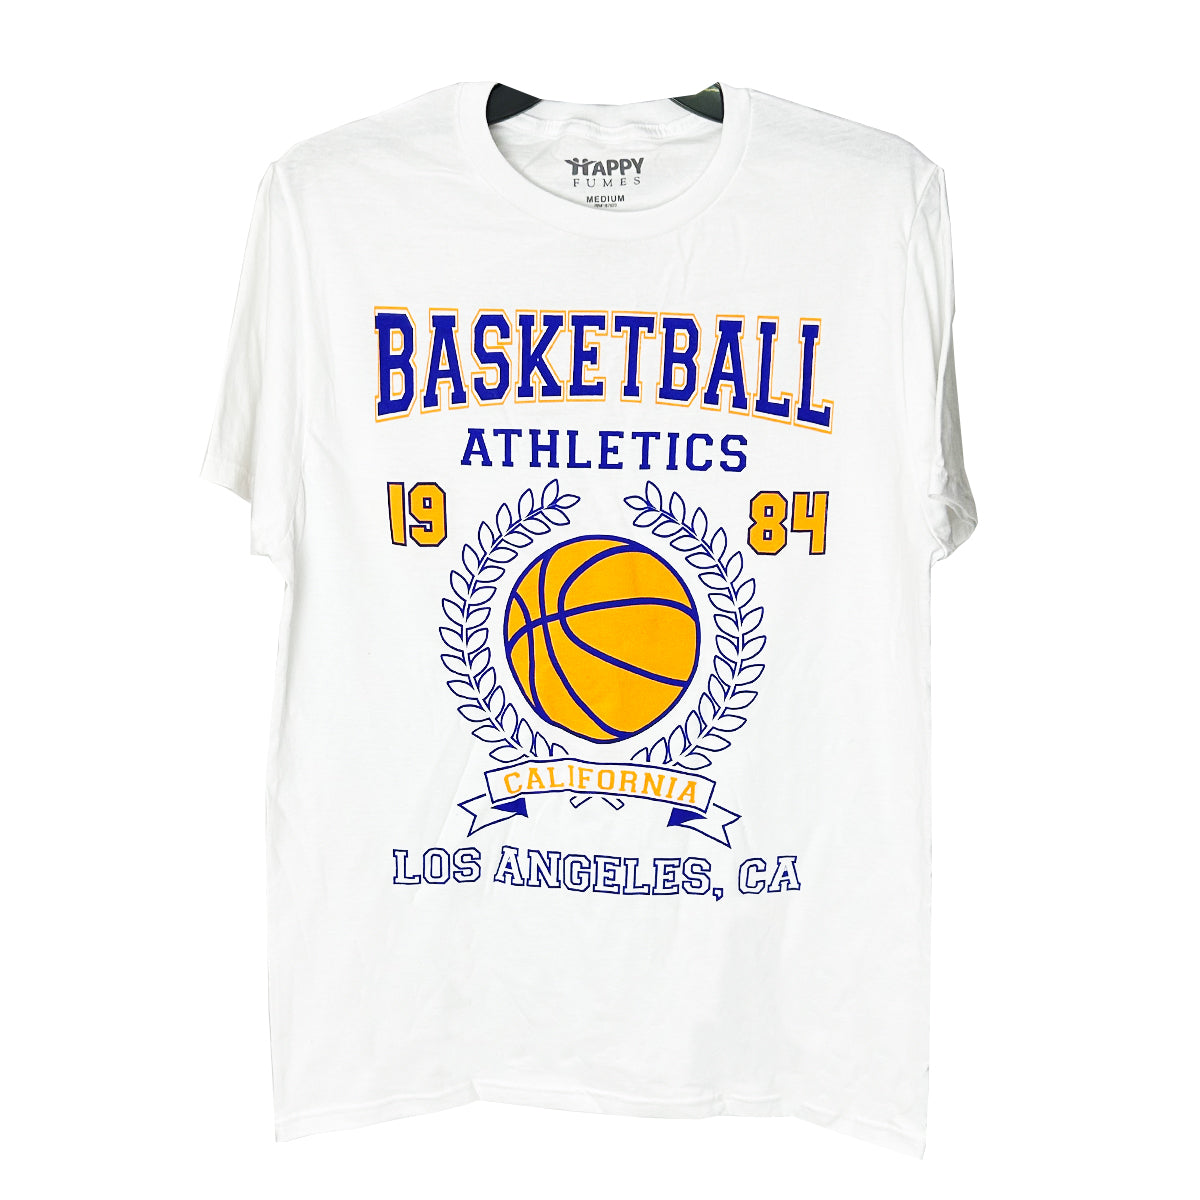 Basketball White - Pack of 6 Units  1S, 2M, 2L, 1XL